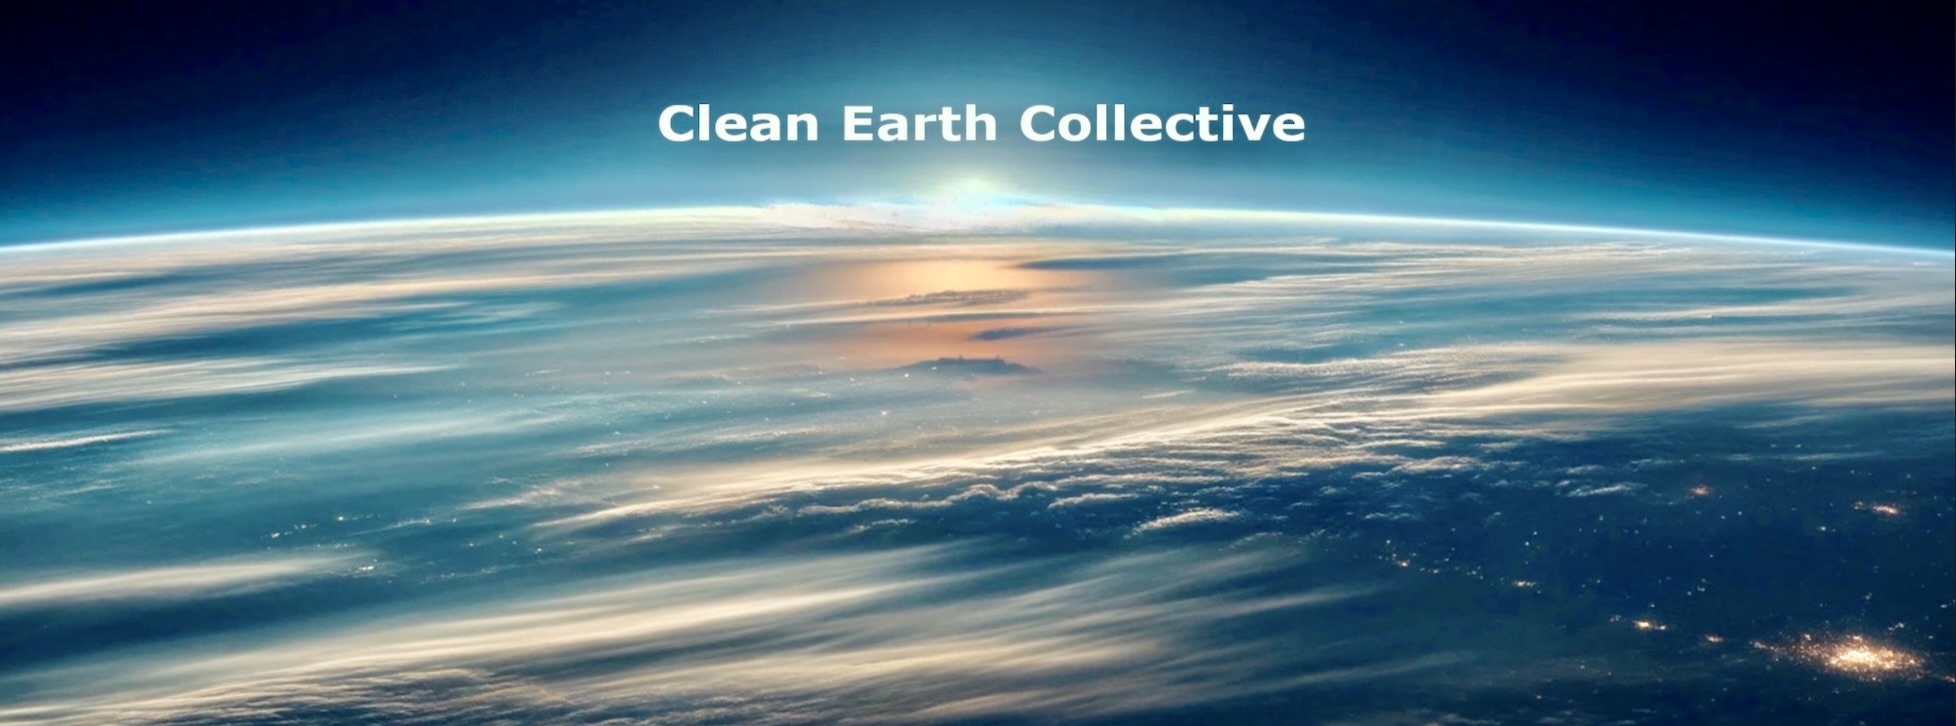 Clean Earth Collective